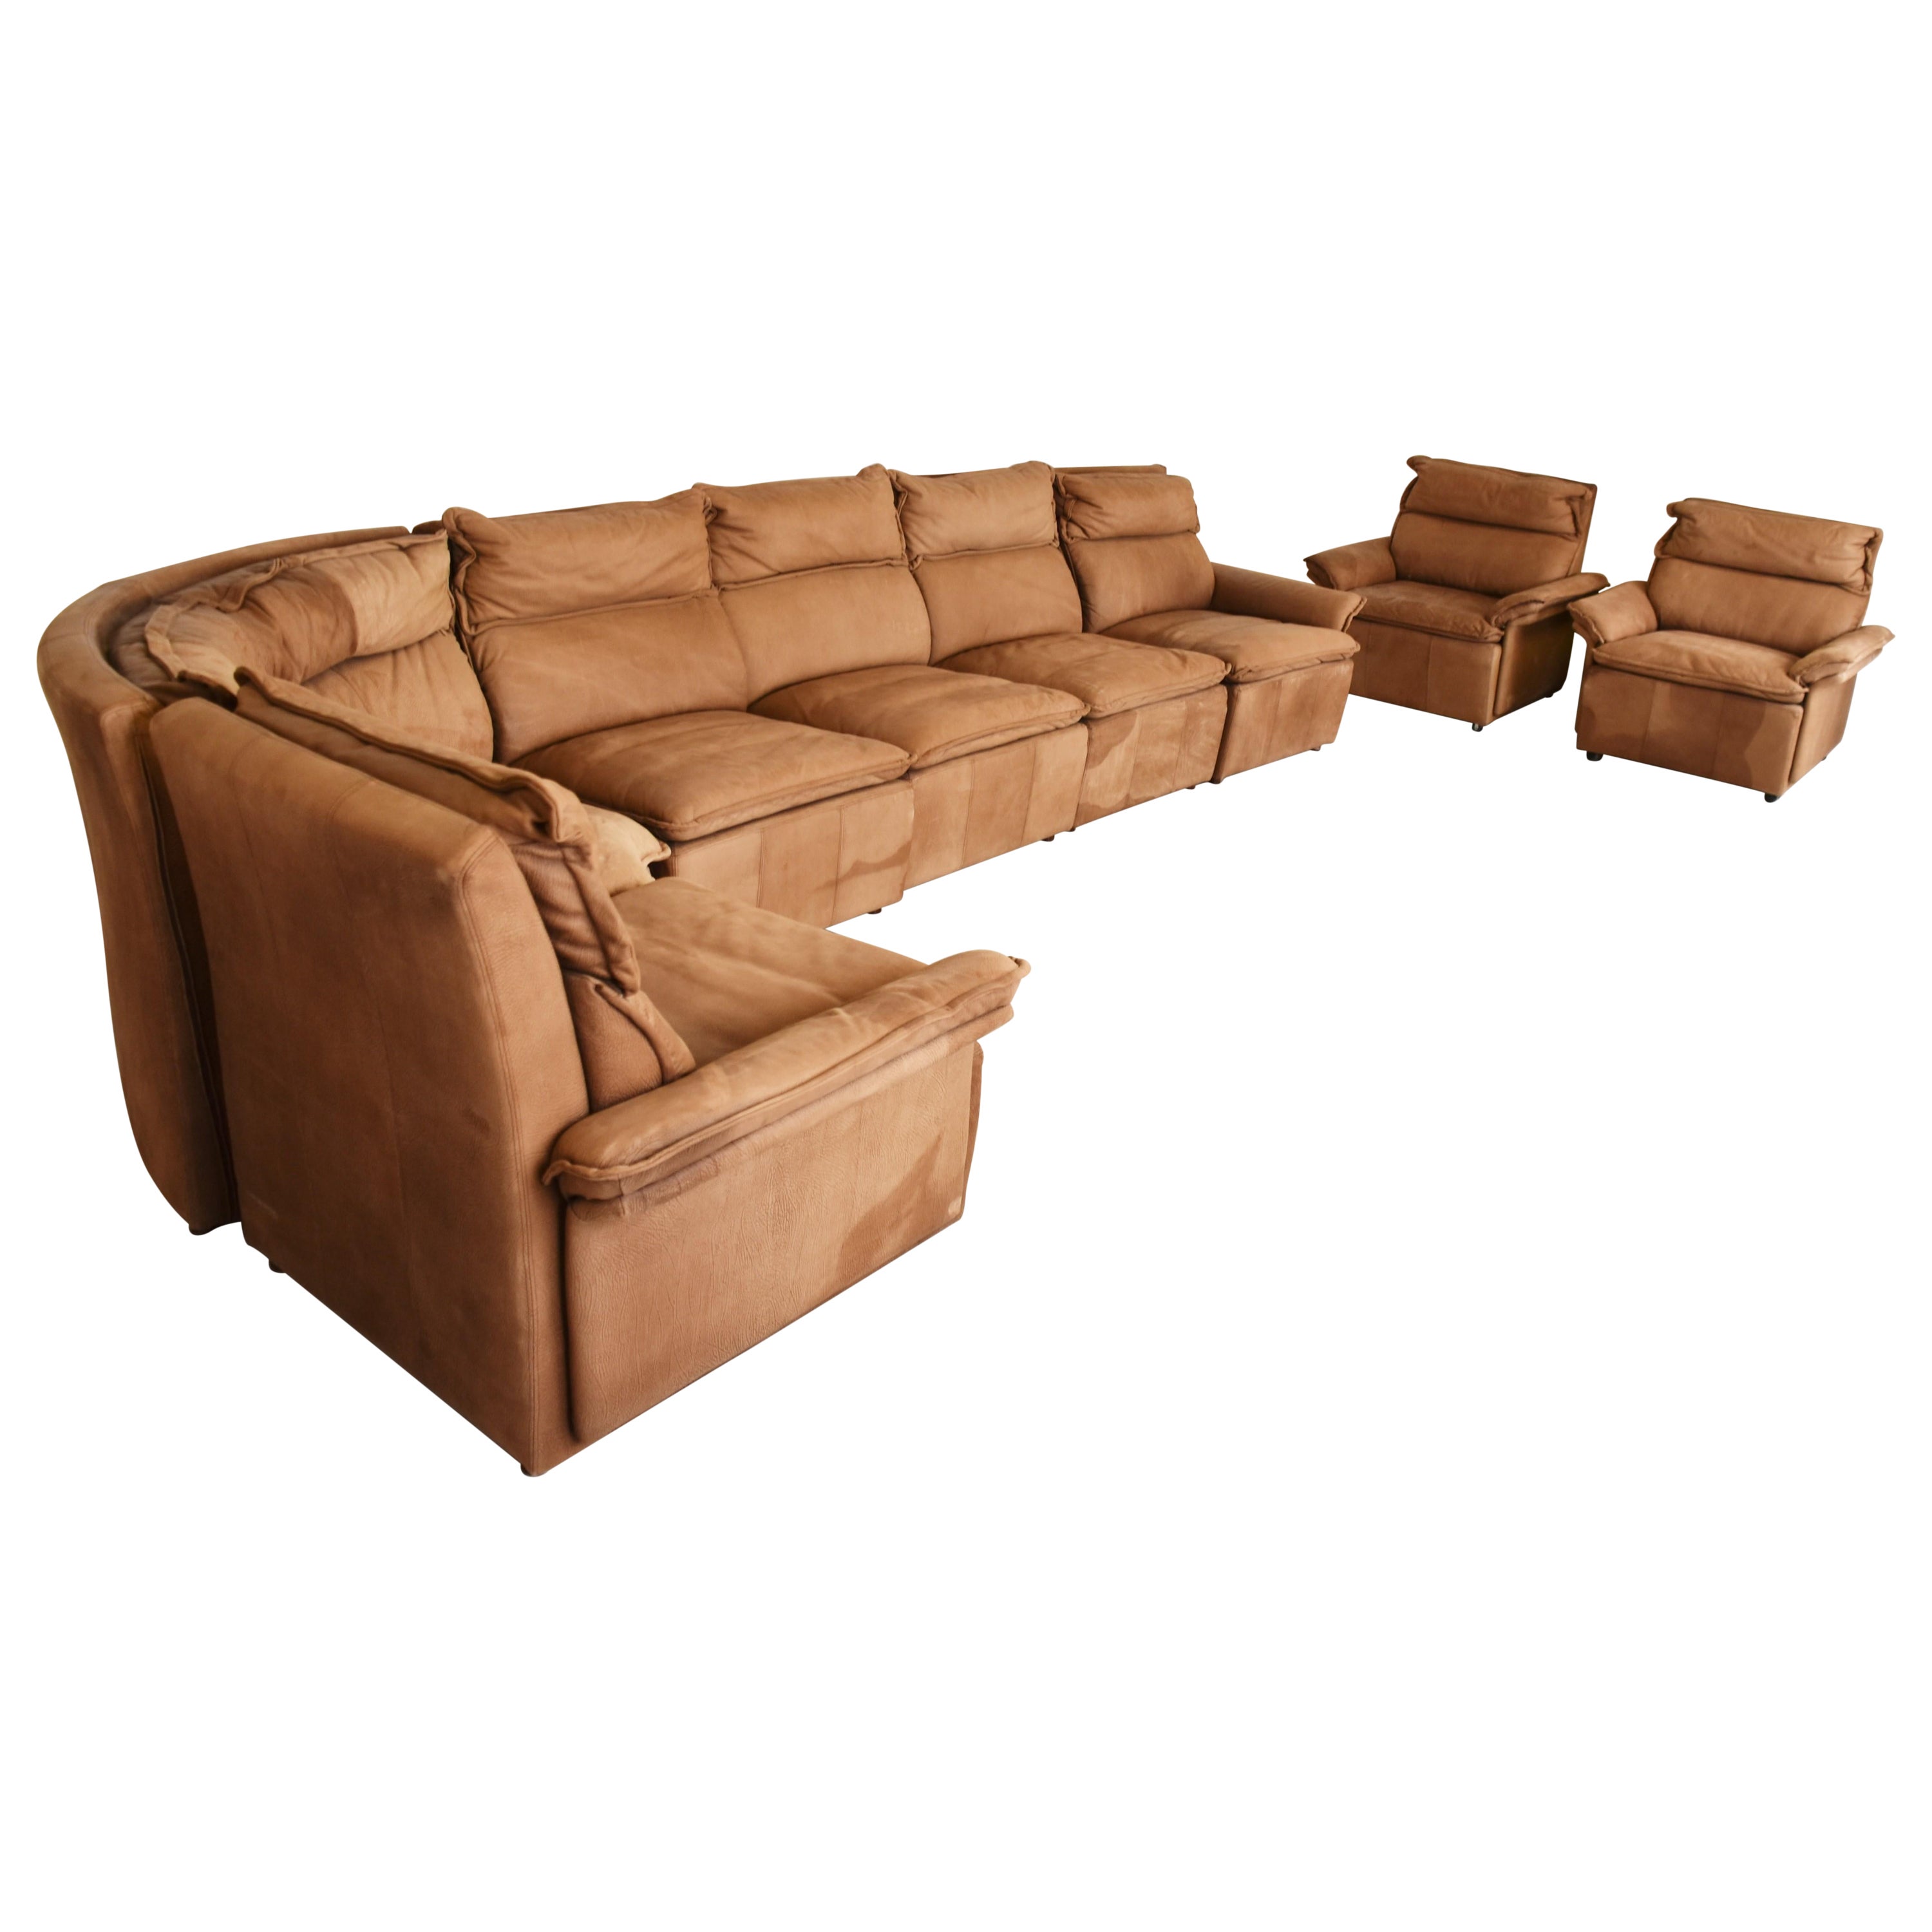 Vintage Brown Leather Modular Sofa by Laauser, 1960s For Sale